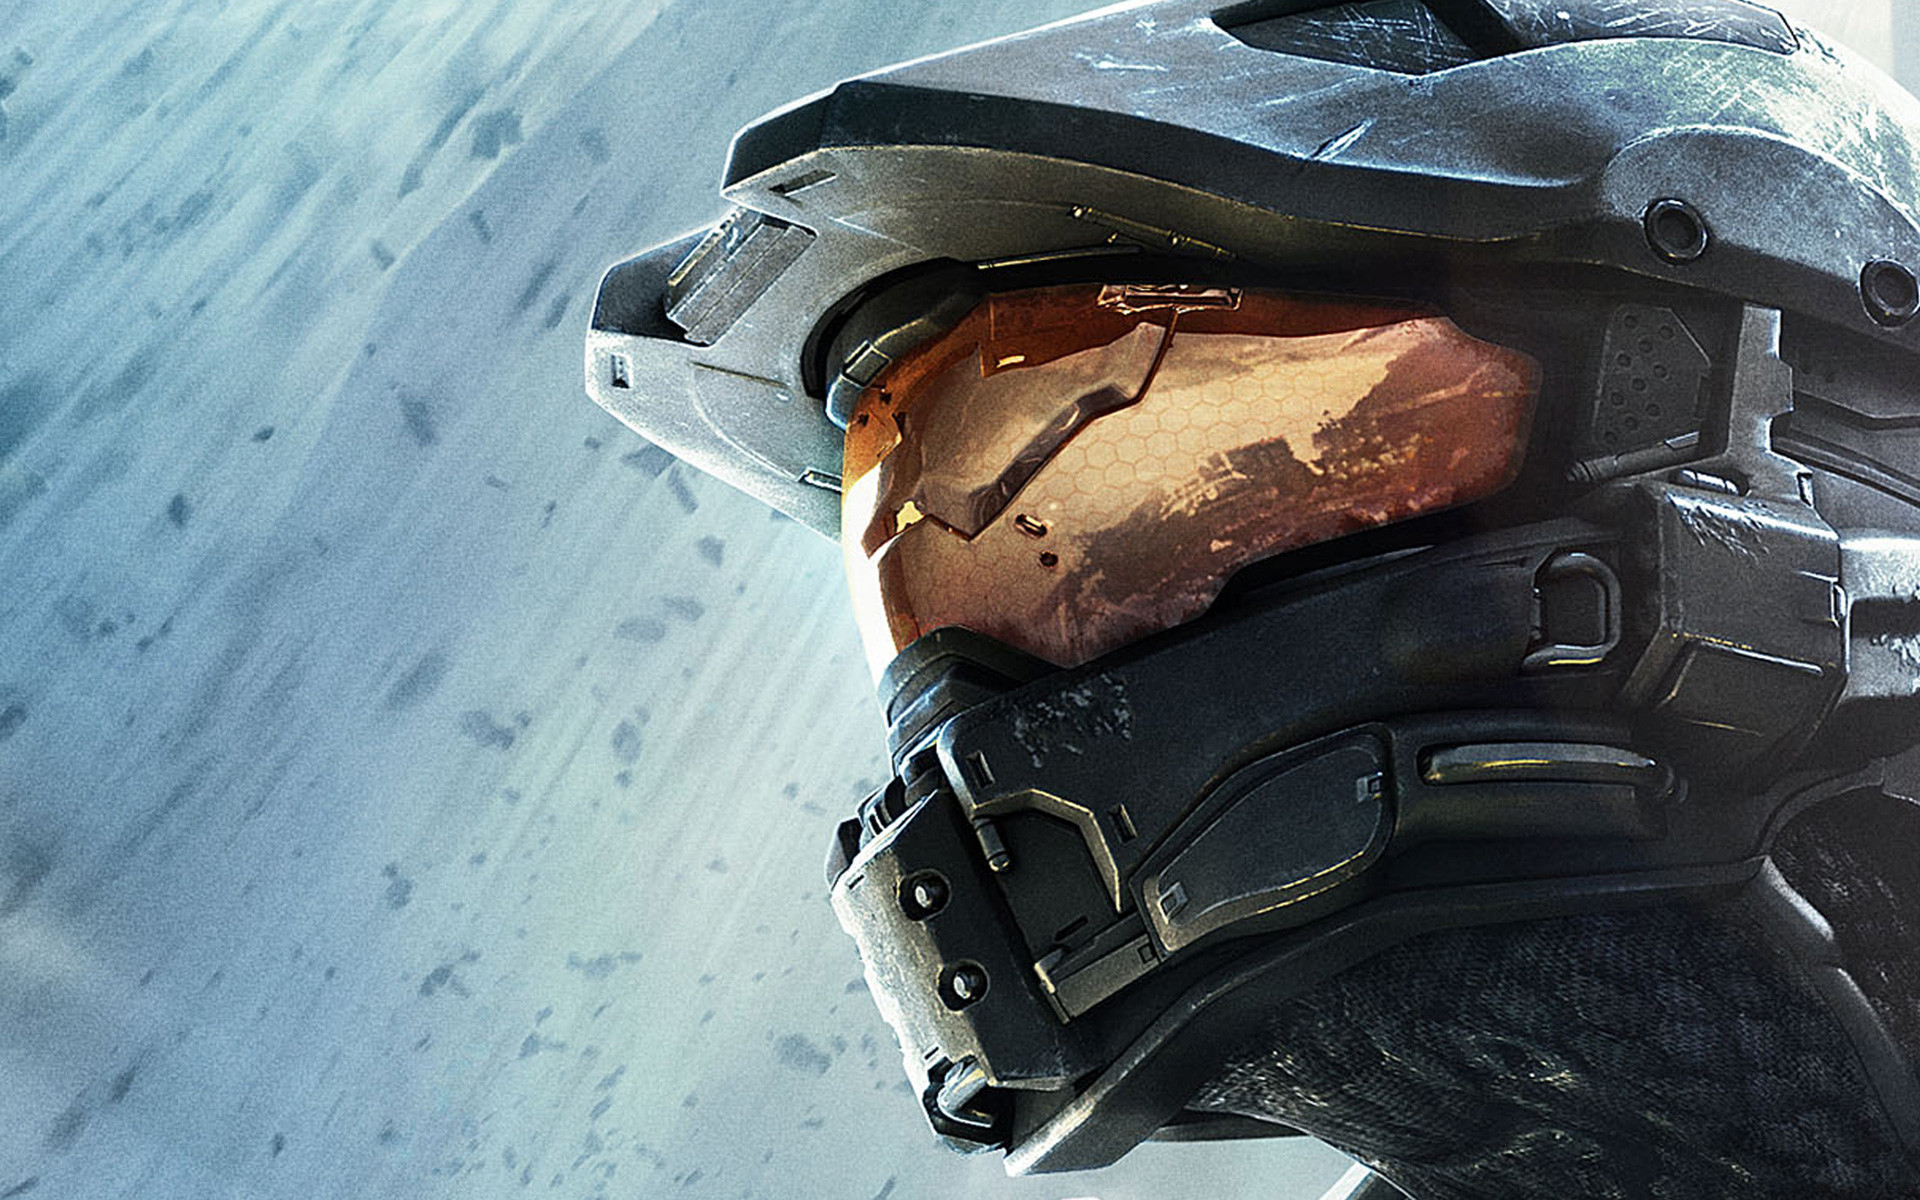 Master Chief Helmet You Can Get | Halo 4 Master Chief Helmet for .